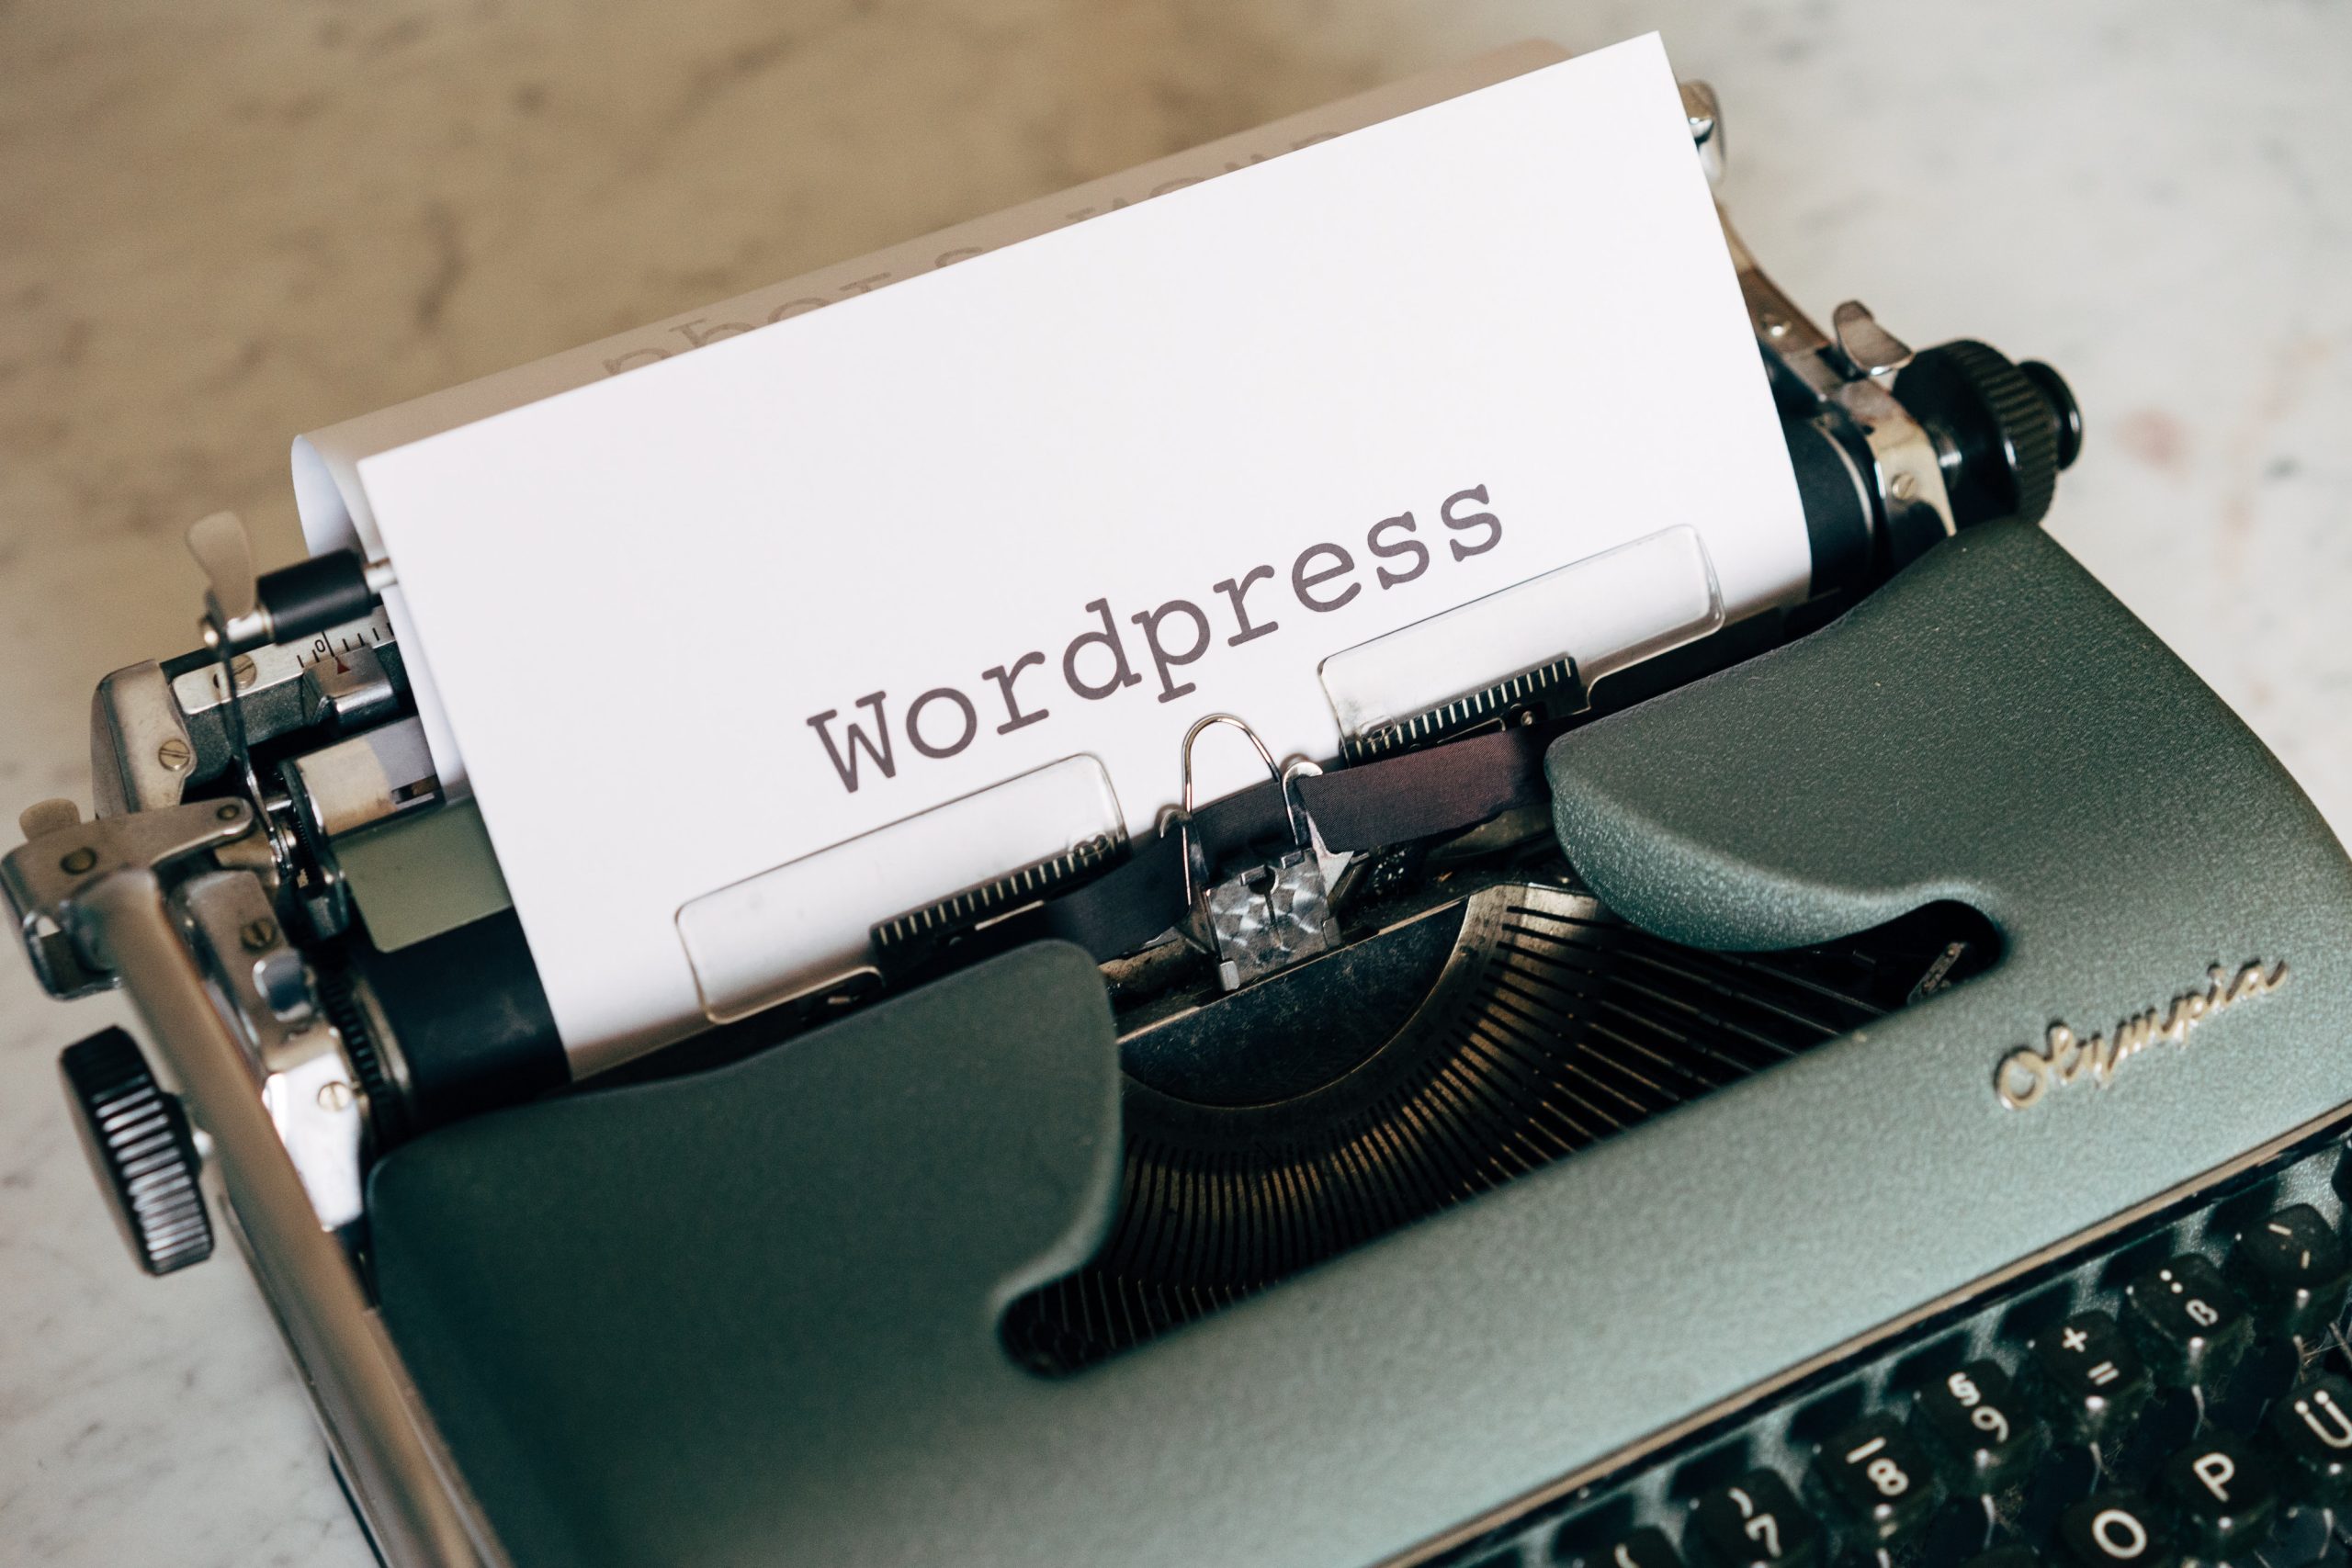 WordPress.com Vs WordPress.org Self Hosted Or Free (Which Is Better?)